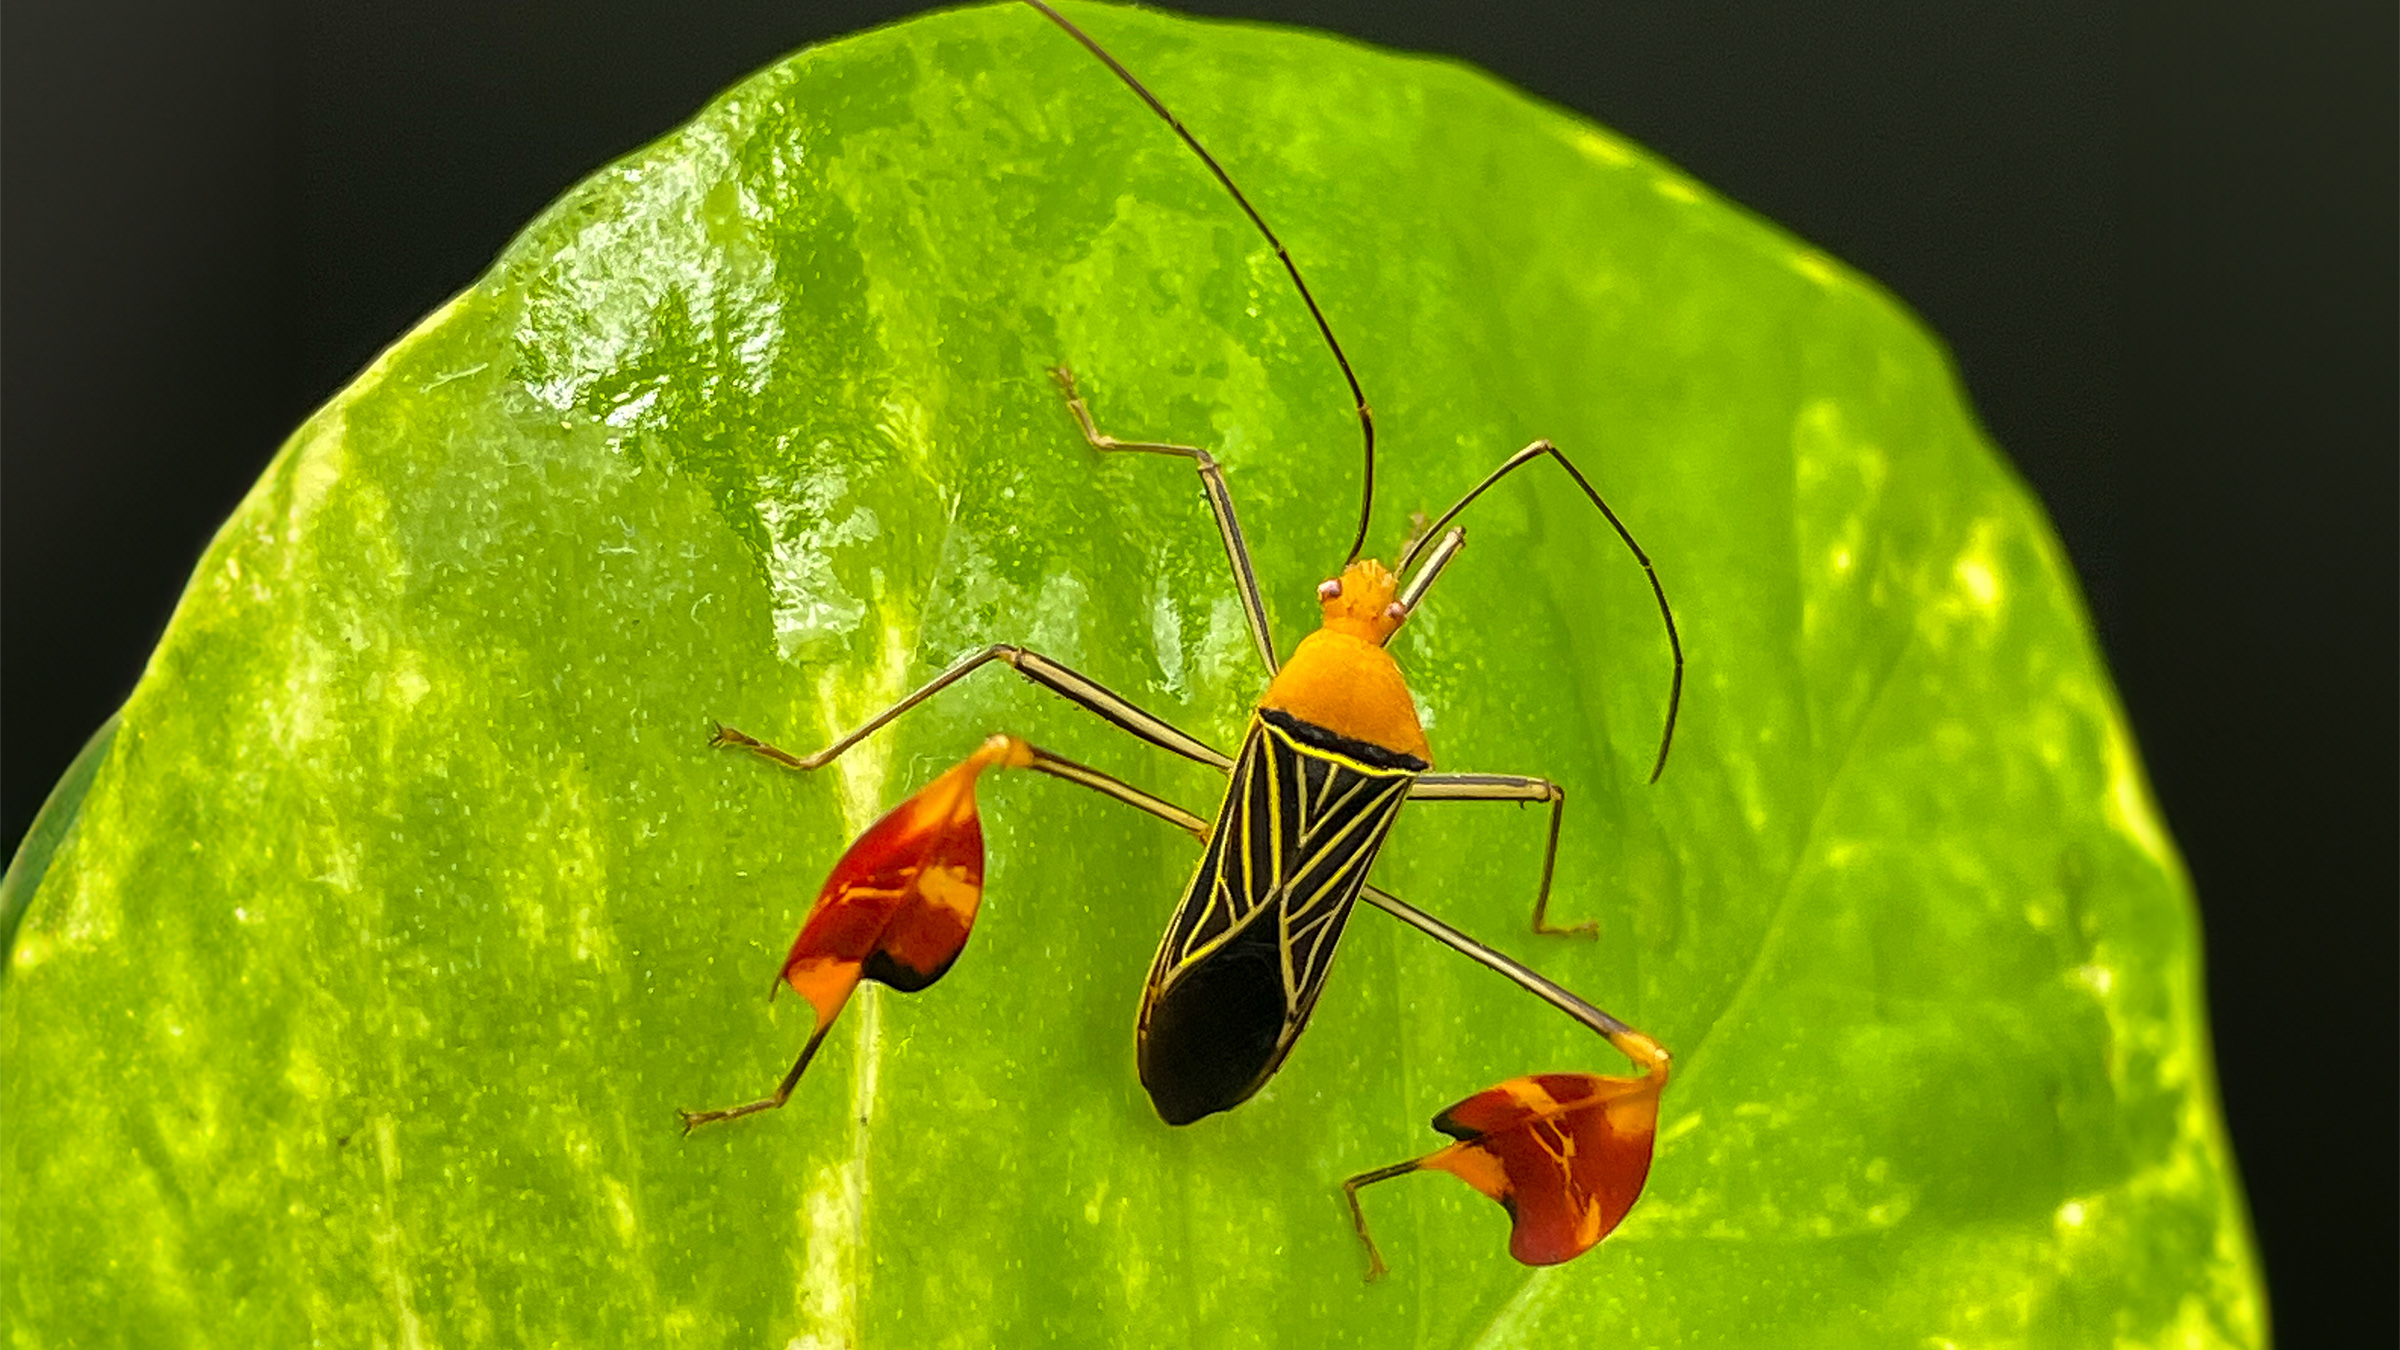 A black and yellow bug with red flaps on its legs sits on a green leaf